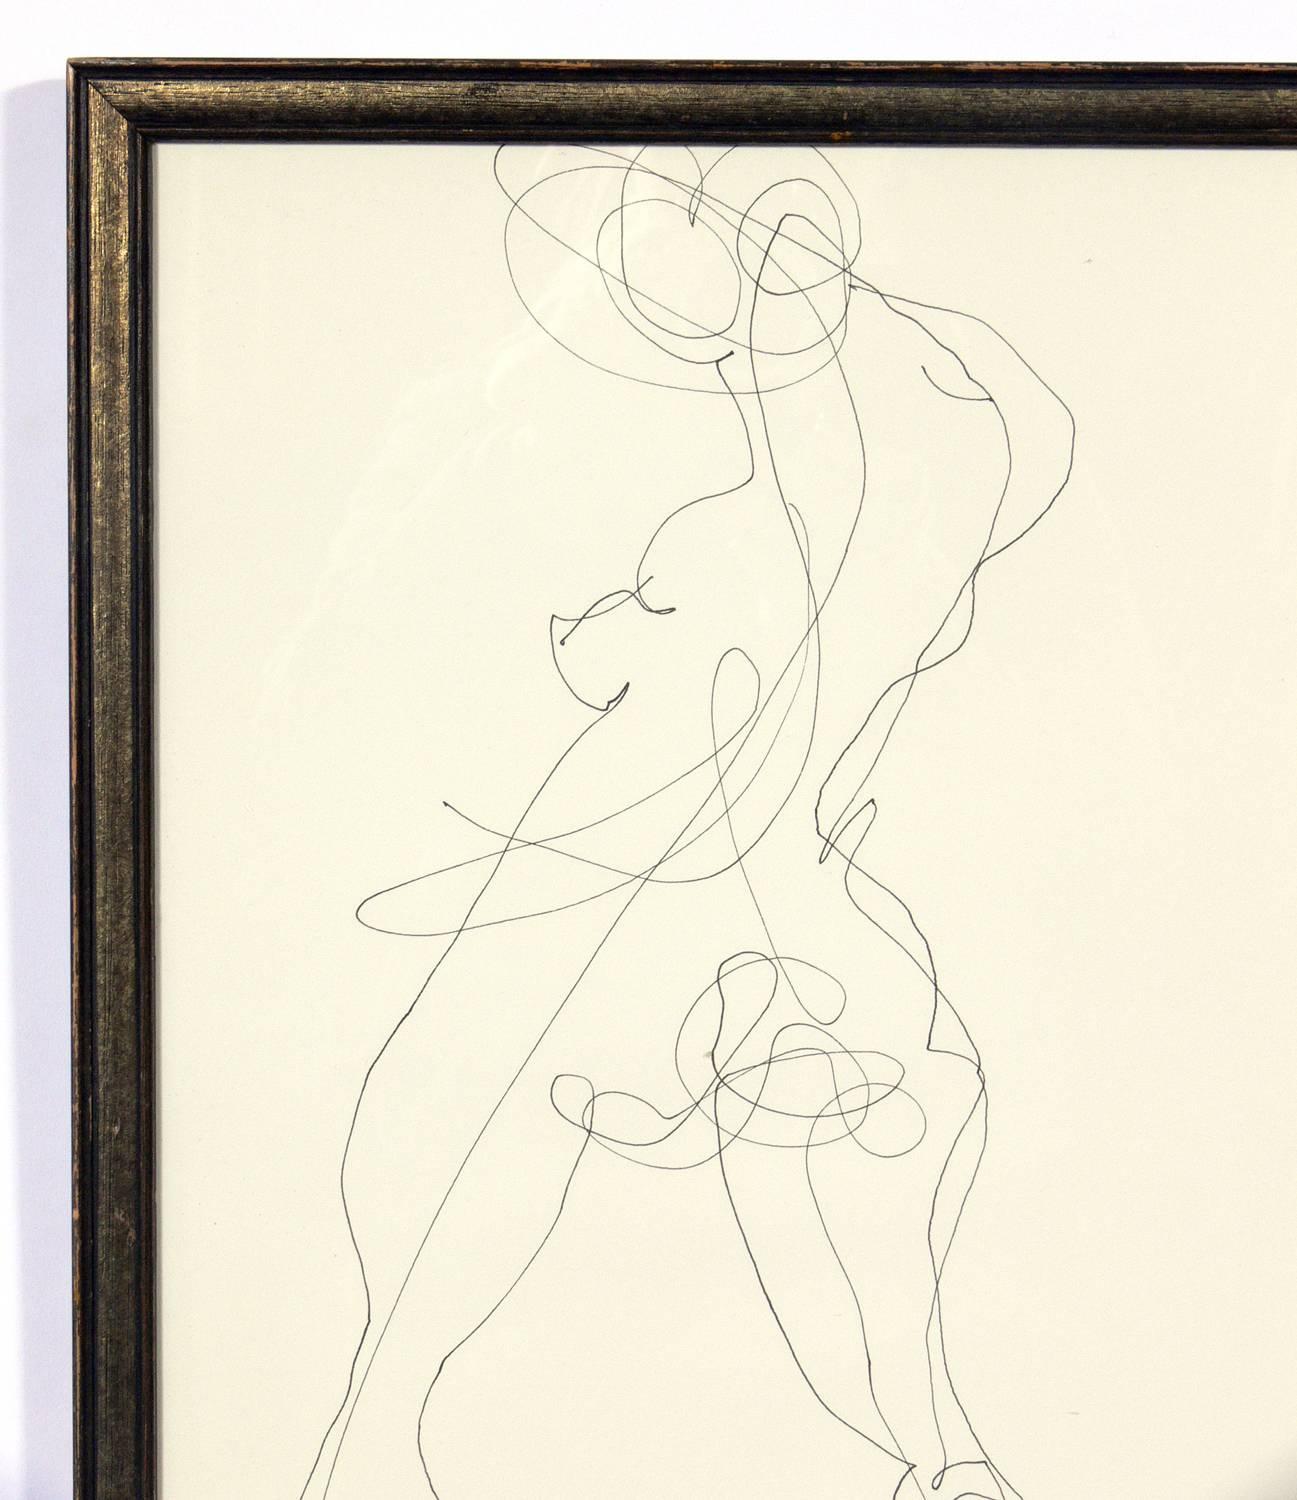 Glass Selection of Figural Line Drawings or Gallery Wall by Miriam Kubach